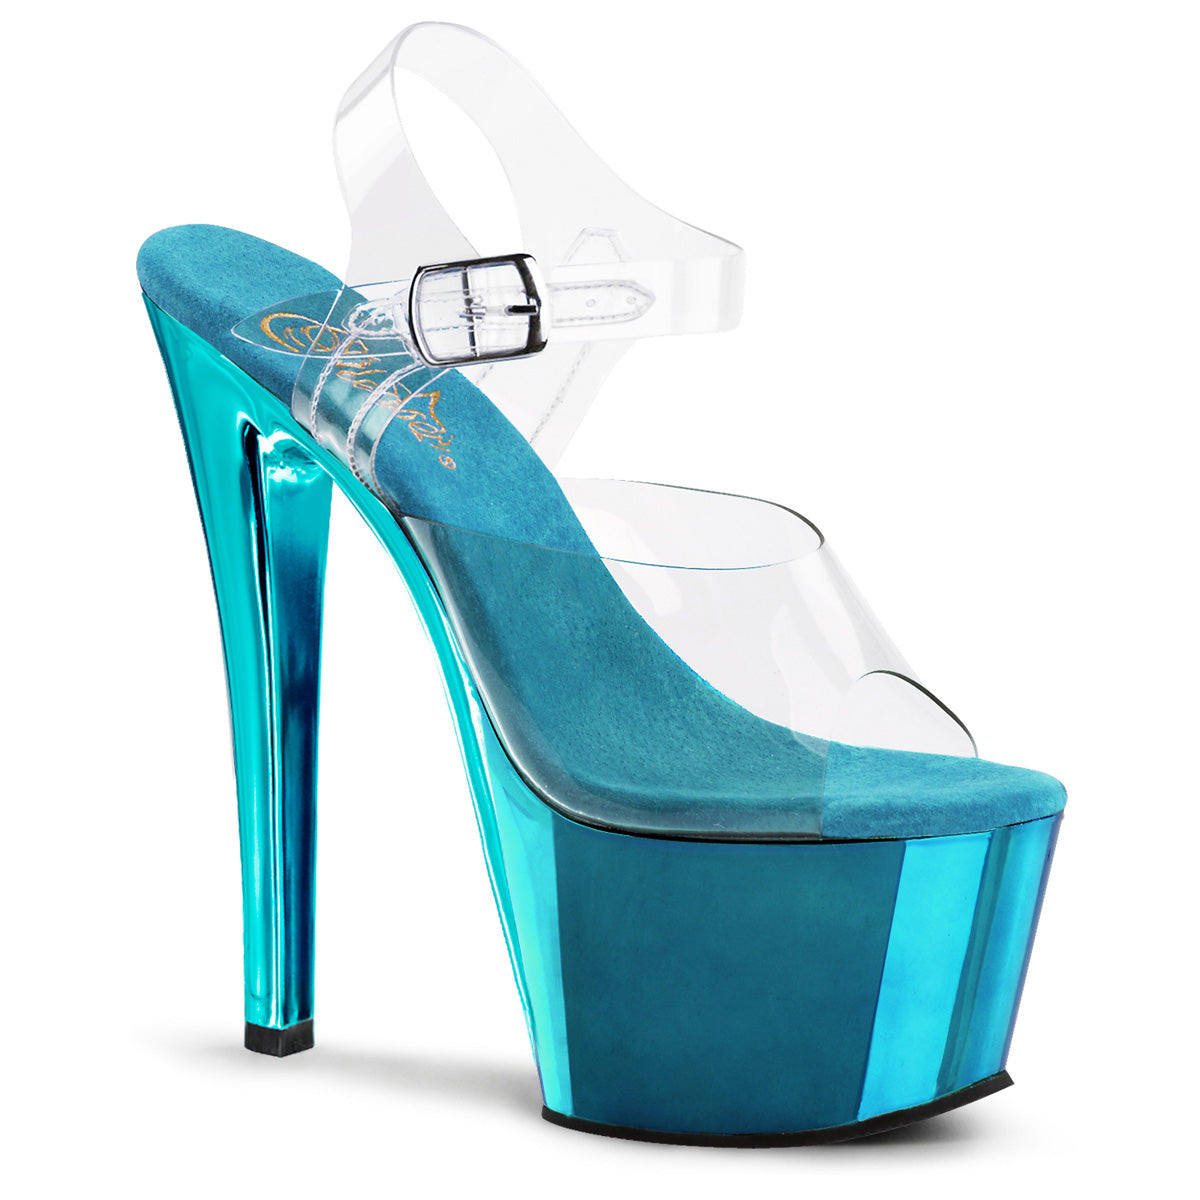 BS1515 Customizable Various Heel Women Bridal wedding Shoes Teal Blue  Crystal Pointed toe Shoes with Matching Bags Set - AliExpress